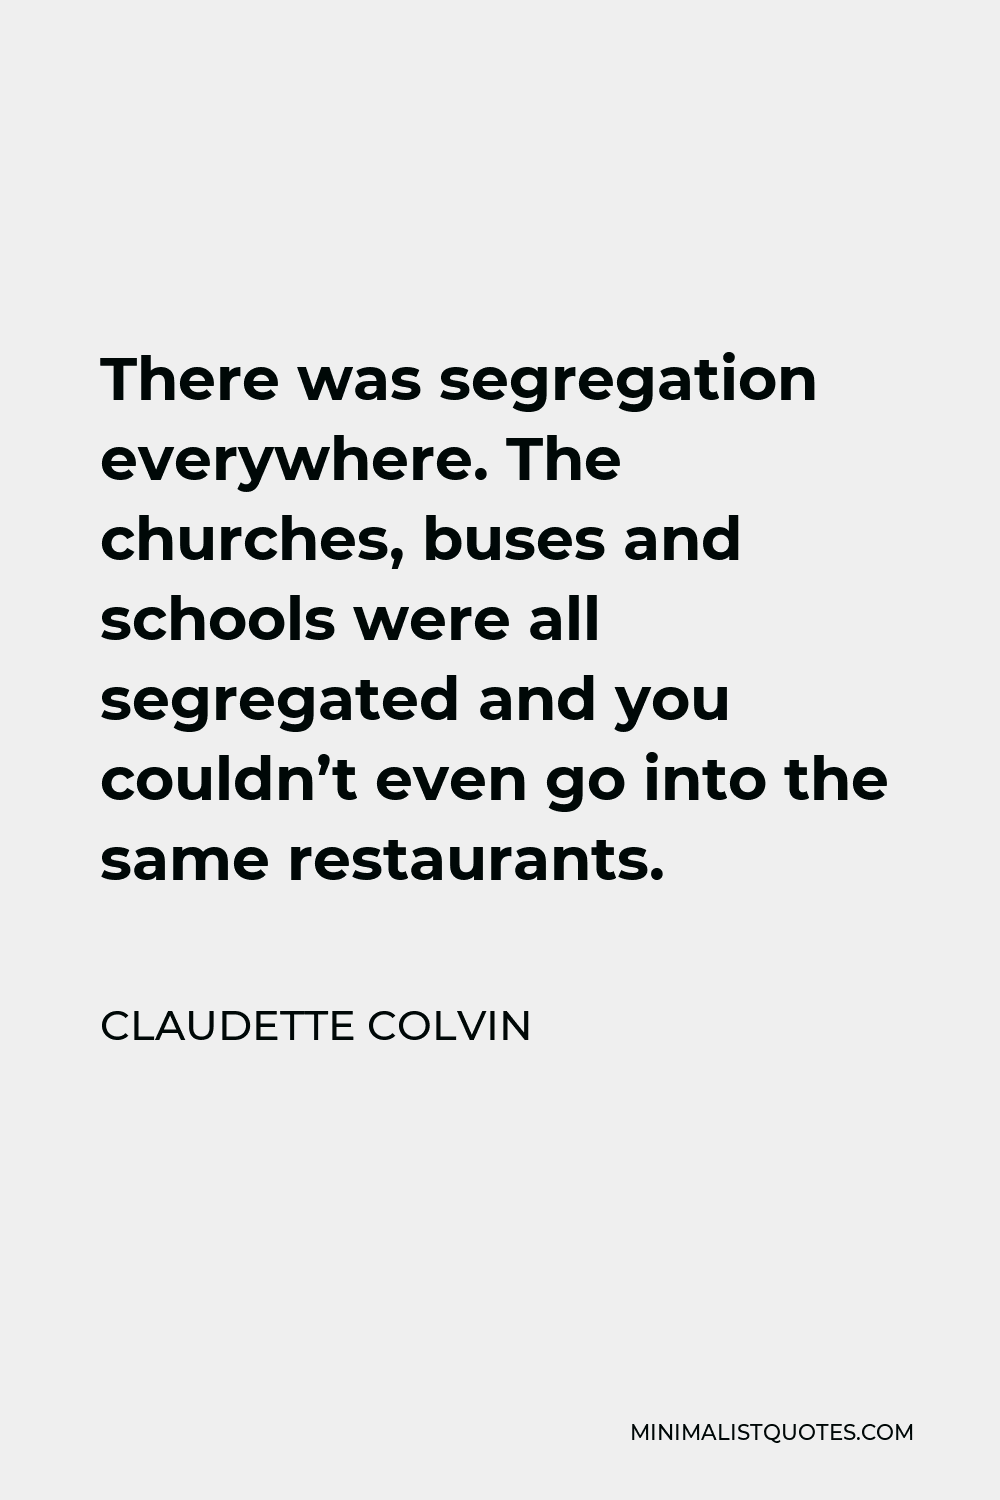 Claudette Colvin Quote - There was segregation everywhere. The churches, buses and schools were all segregated and you couldn’t even go into the same restaurants.